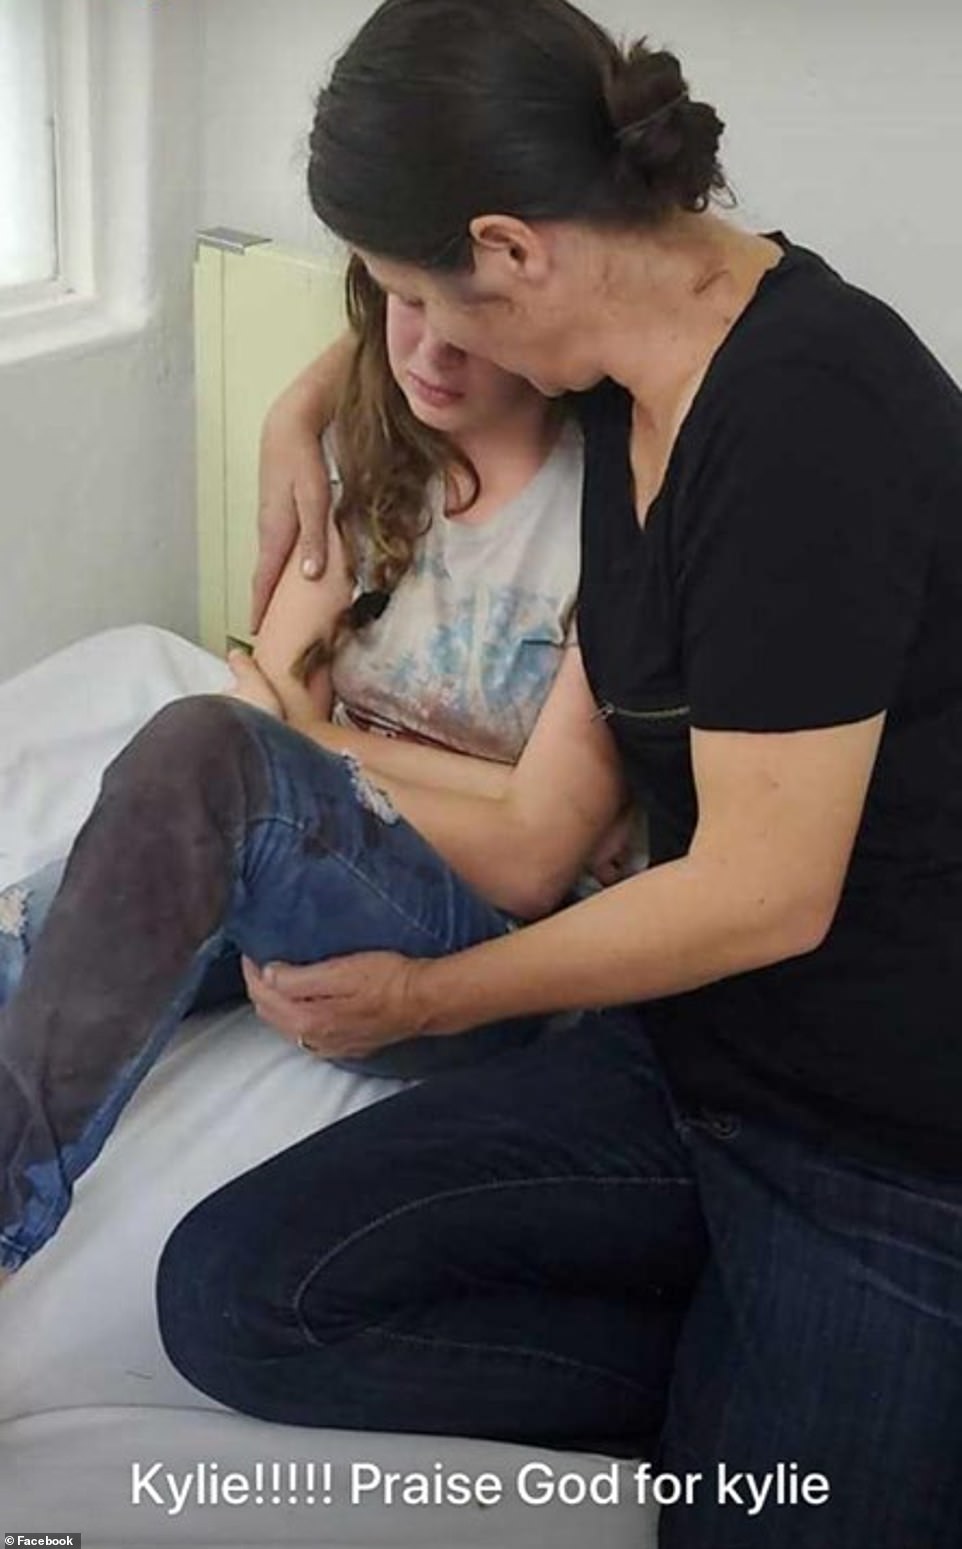 20615650-7650129-Kylie_Evelyn_14_is_pictured_in_hospital_with_blood_soaked_jeans_-a-31_1572949905758.jpg